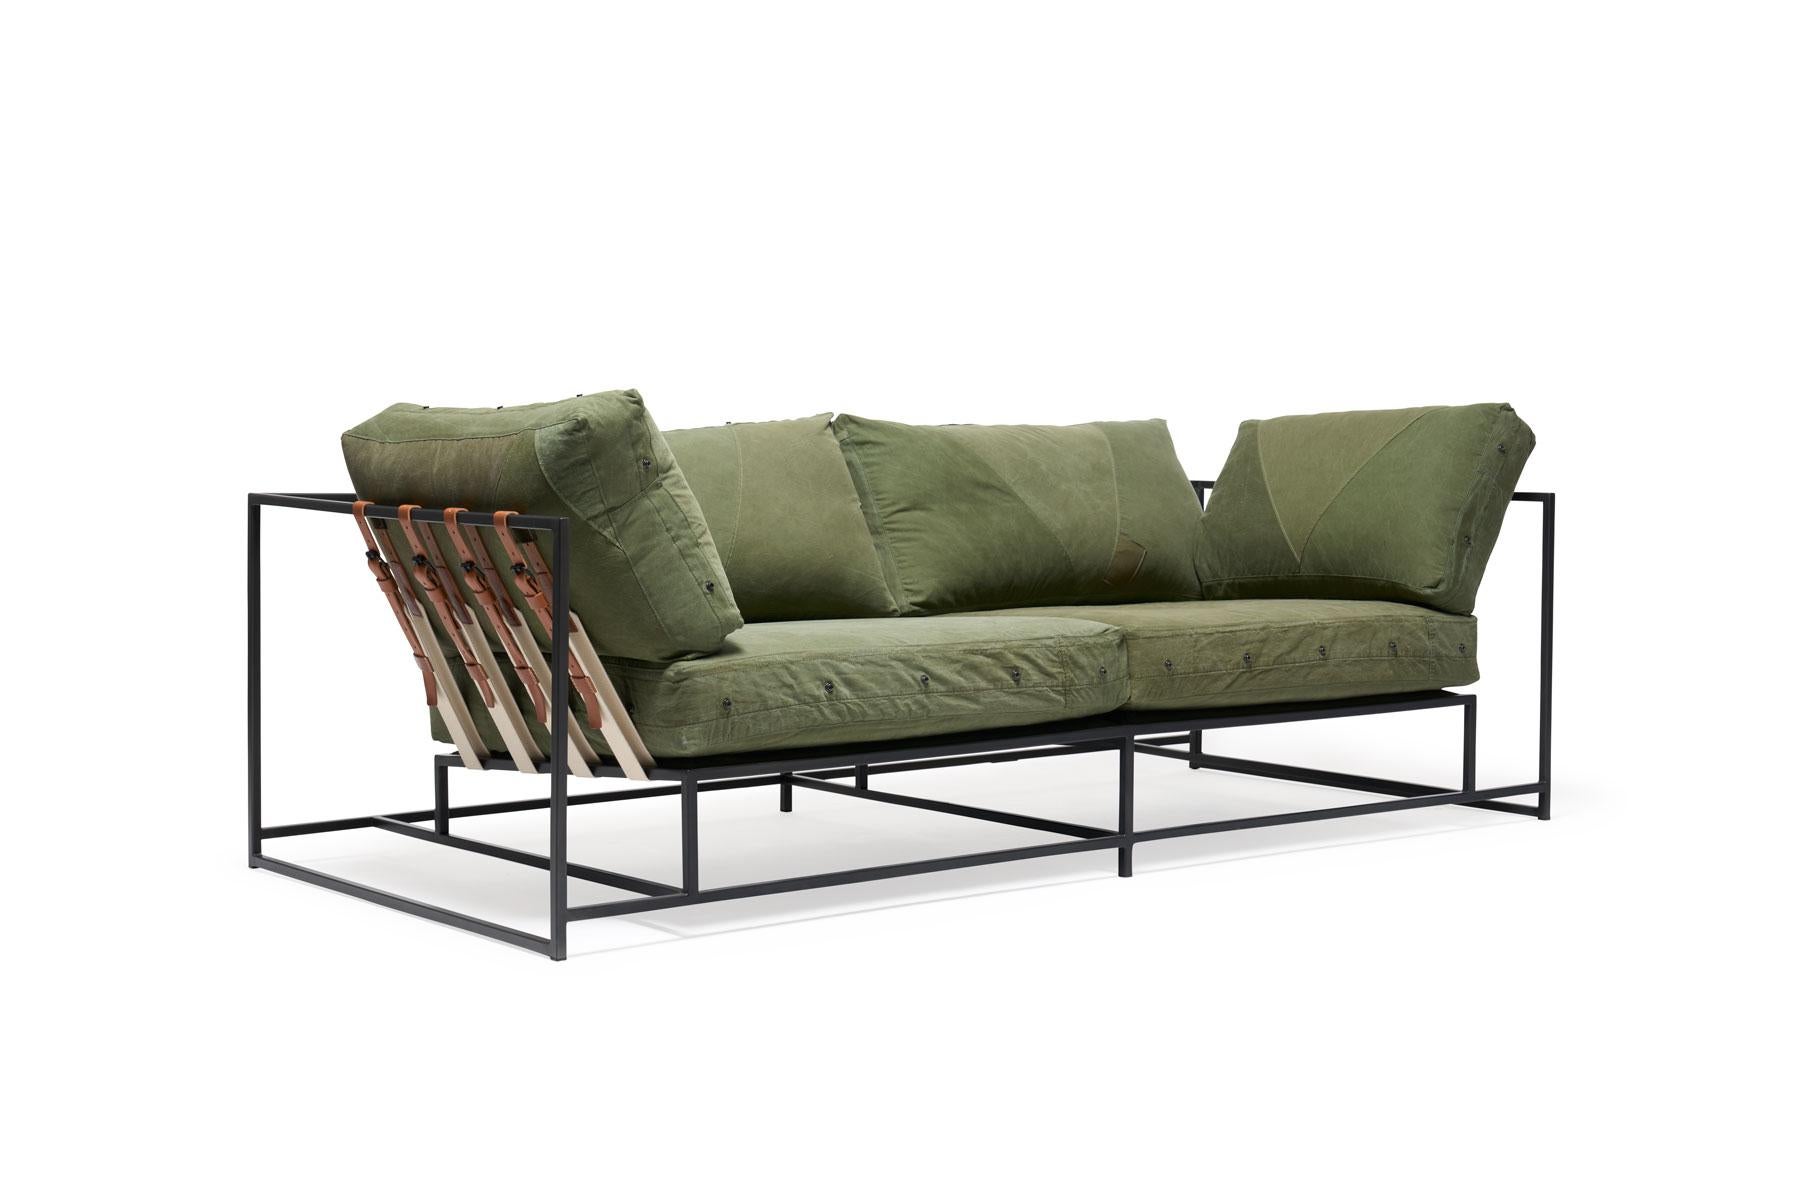 The Inheritance two-seat sofa by Stephen Kenn is as comfortable as it is unique. The design features an exposed construction composed of three elements - a steel frame, plush upholstery, and supportive belts. The deep seating area is perfect for a